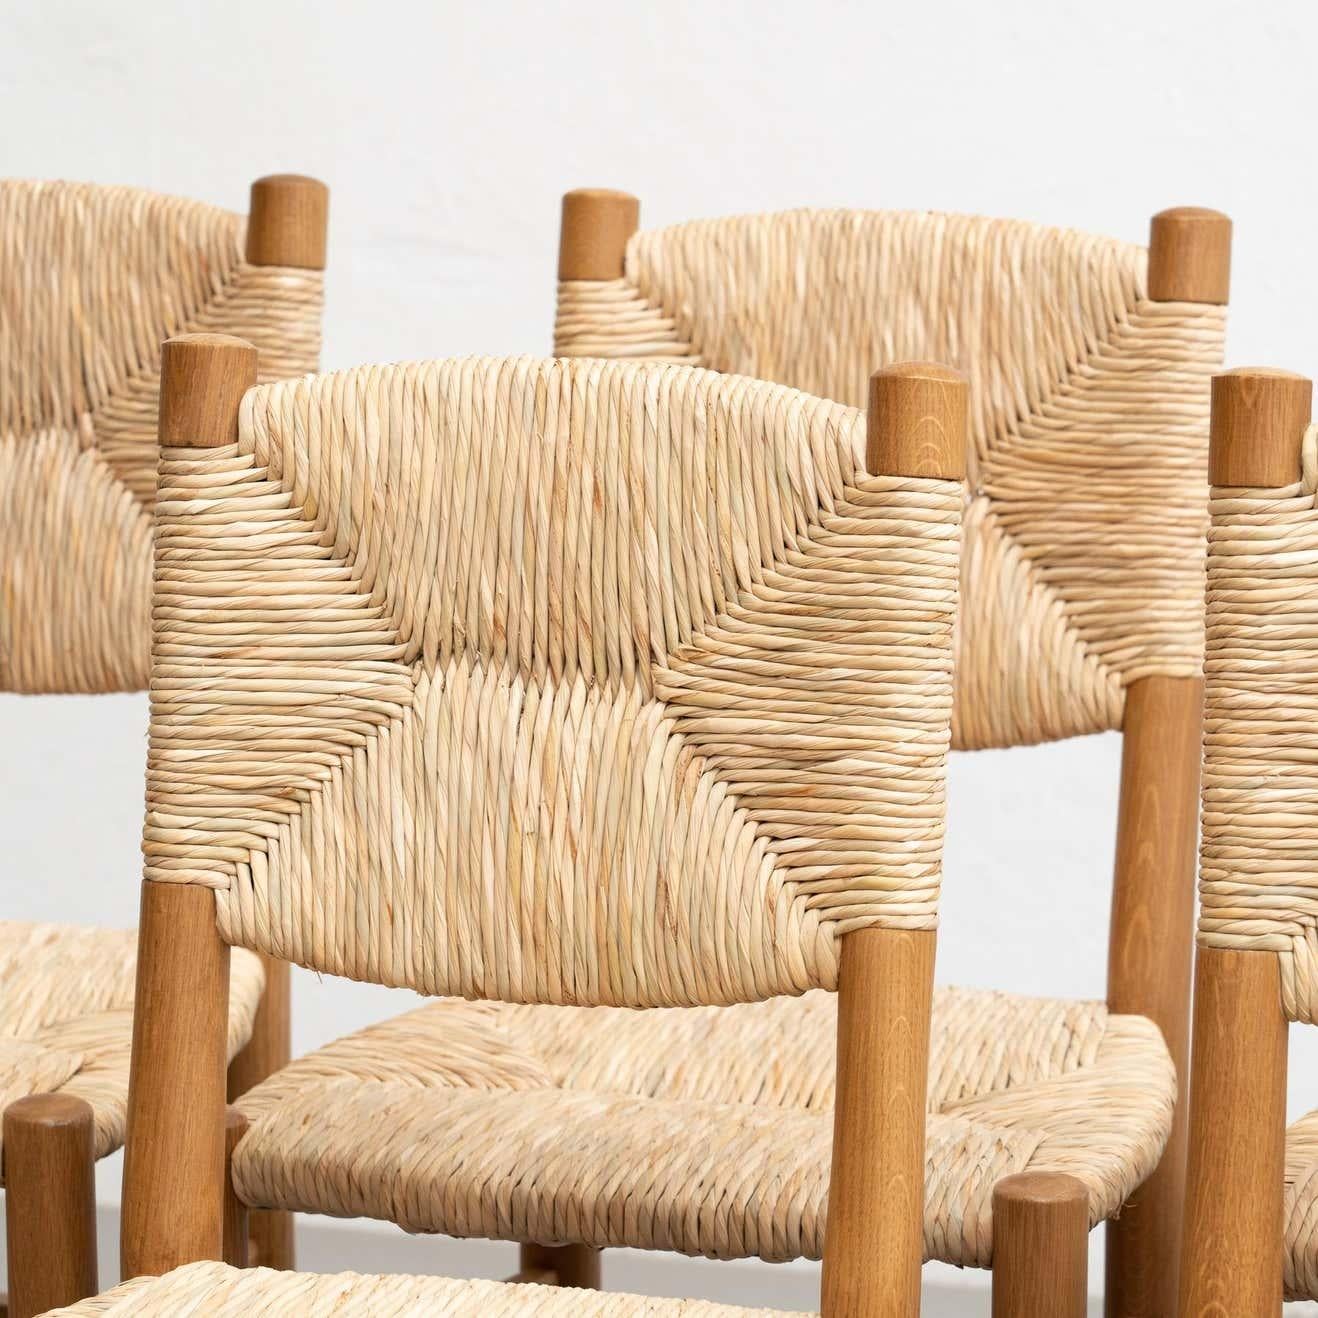 Set of Six After Charlotte Perriand N.19 Chairs, Wood Rattan, Mid-Century Modern In Good Condition For Sale In Barcelona, Barcelona